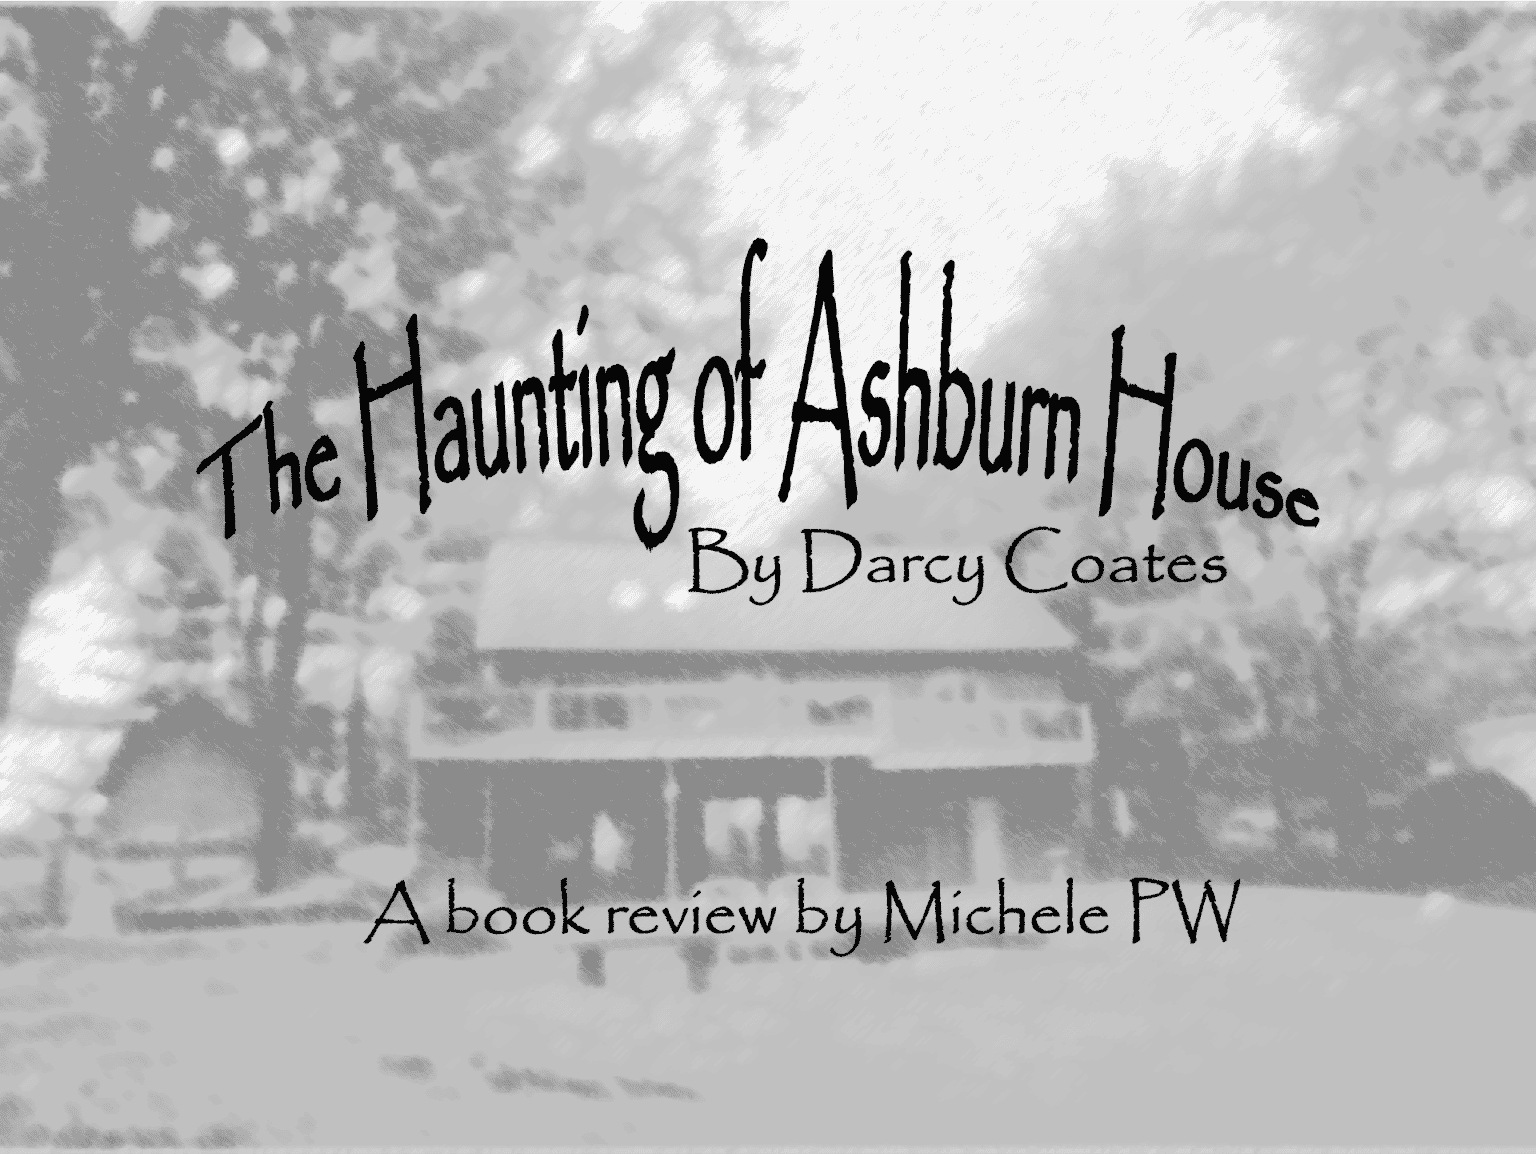 The Haunting of Ashburn House by Darcy Coates